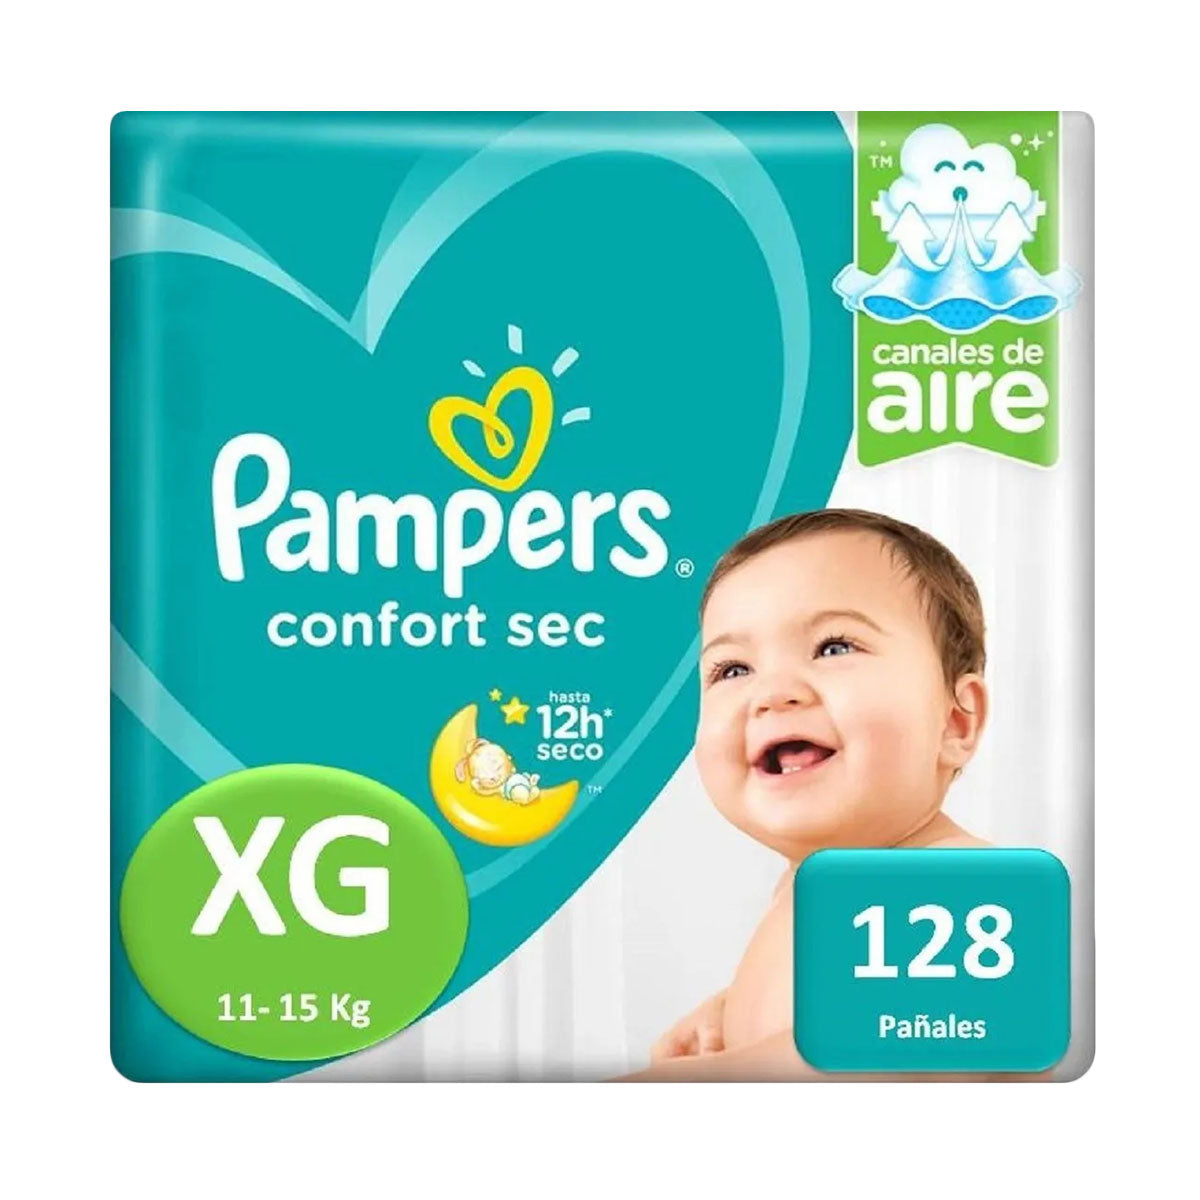 Pañales Pampers Confort Sec XG (128 unidades)